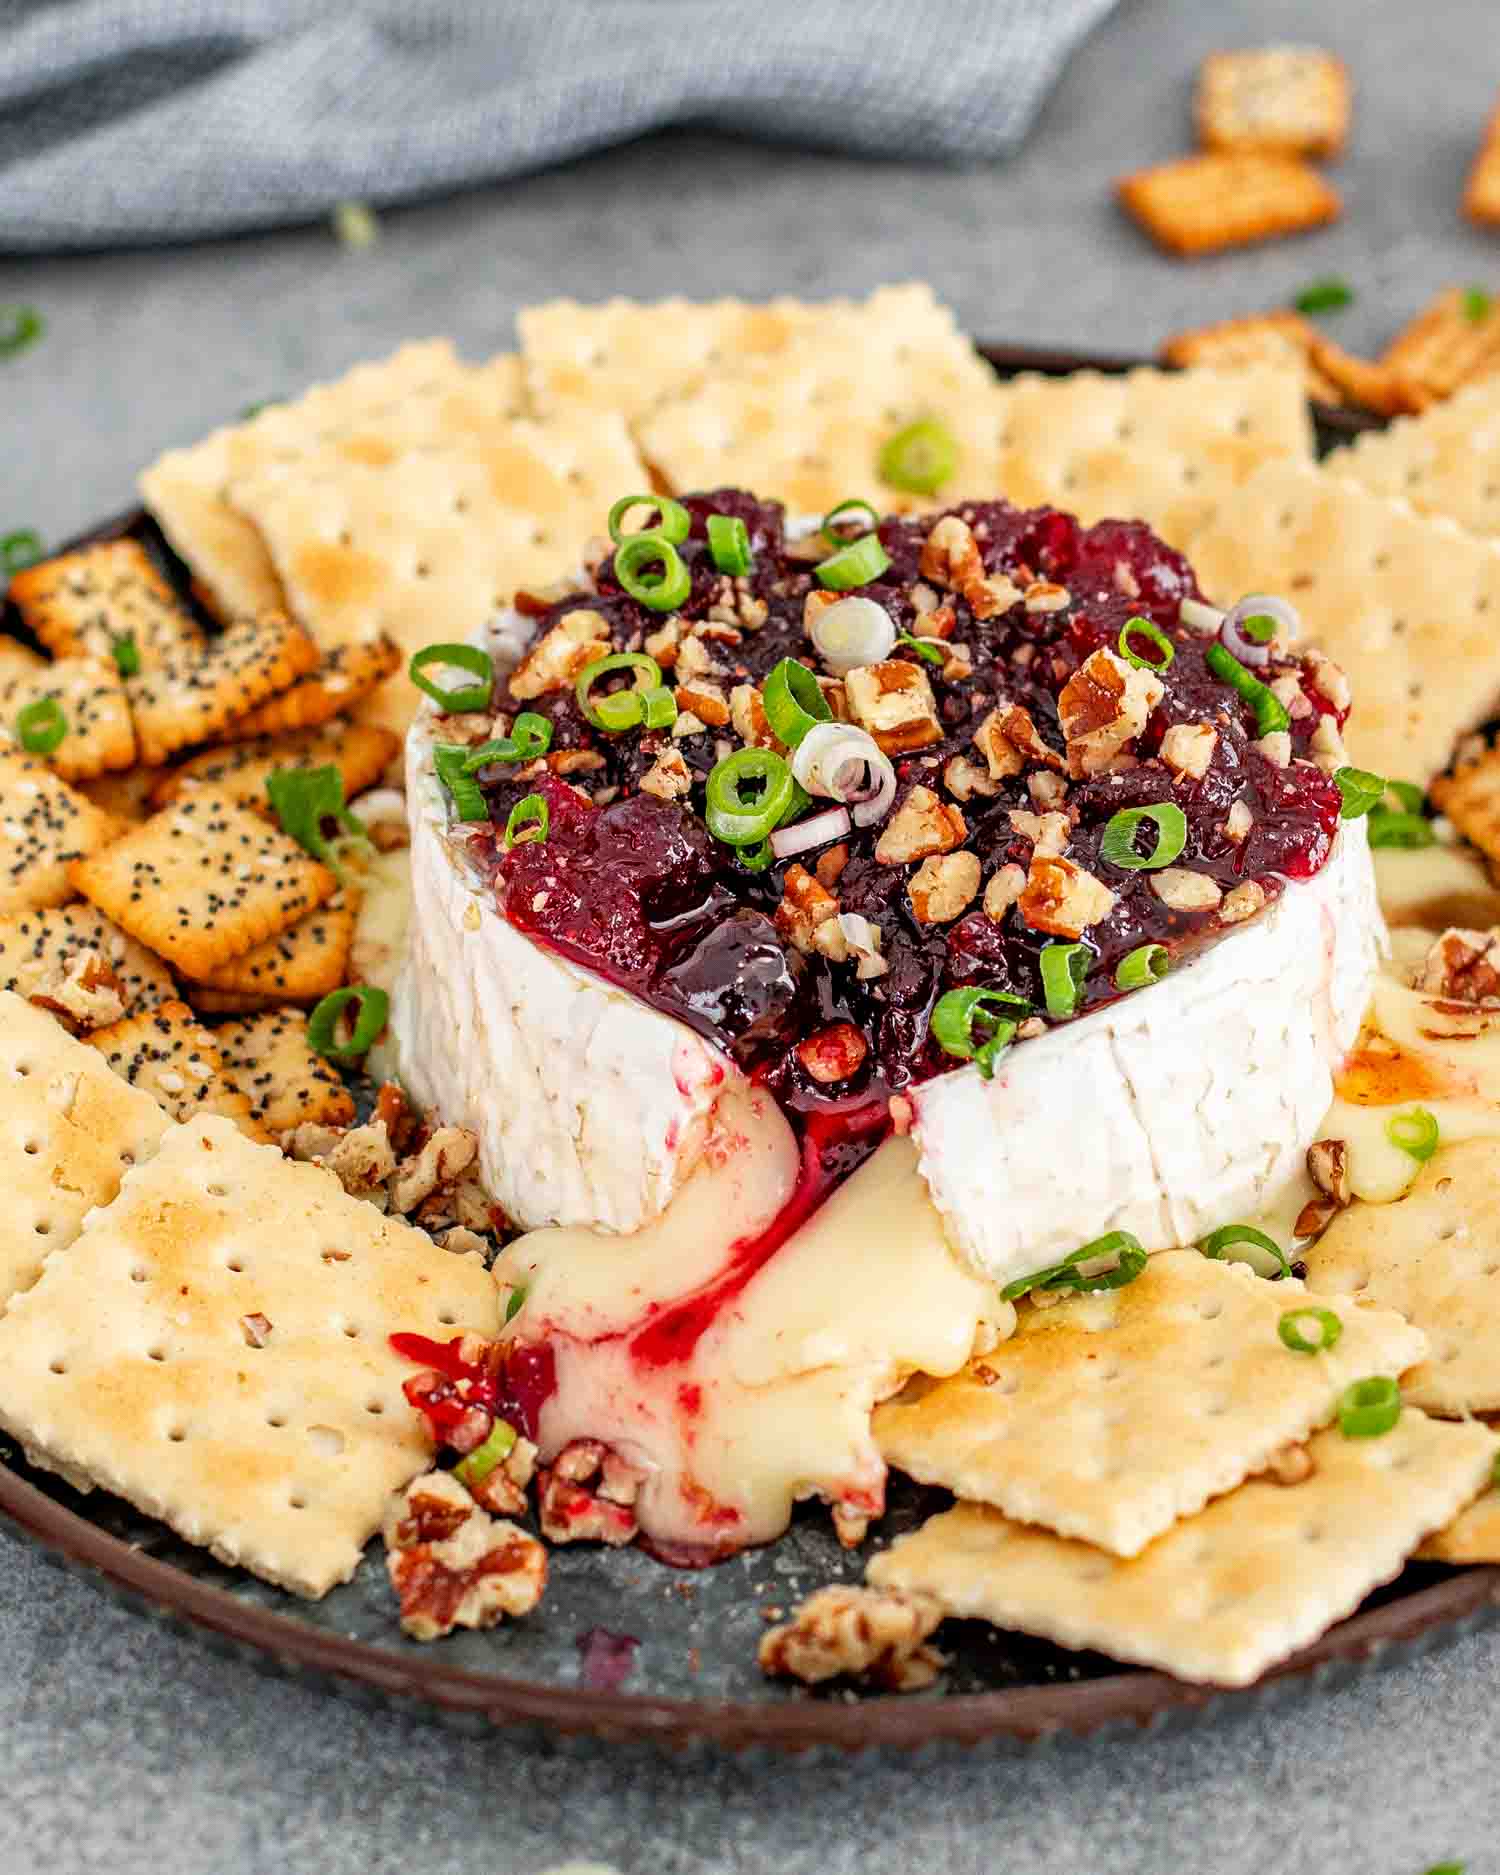 An image showcasing a perfectly baked wheel of Brie cheese topped with a rich, ruby-red cranberry sauce and sprinkled with chopped pecans and sliced green onions. The cheese is oozing out enticingly onto a dark plate, surrounded by an assortment of crackers. 